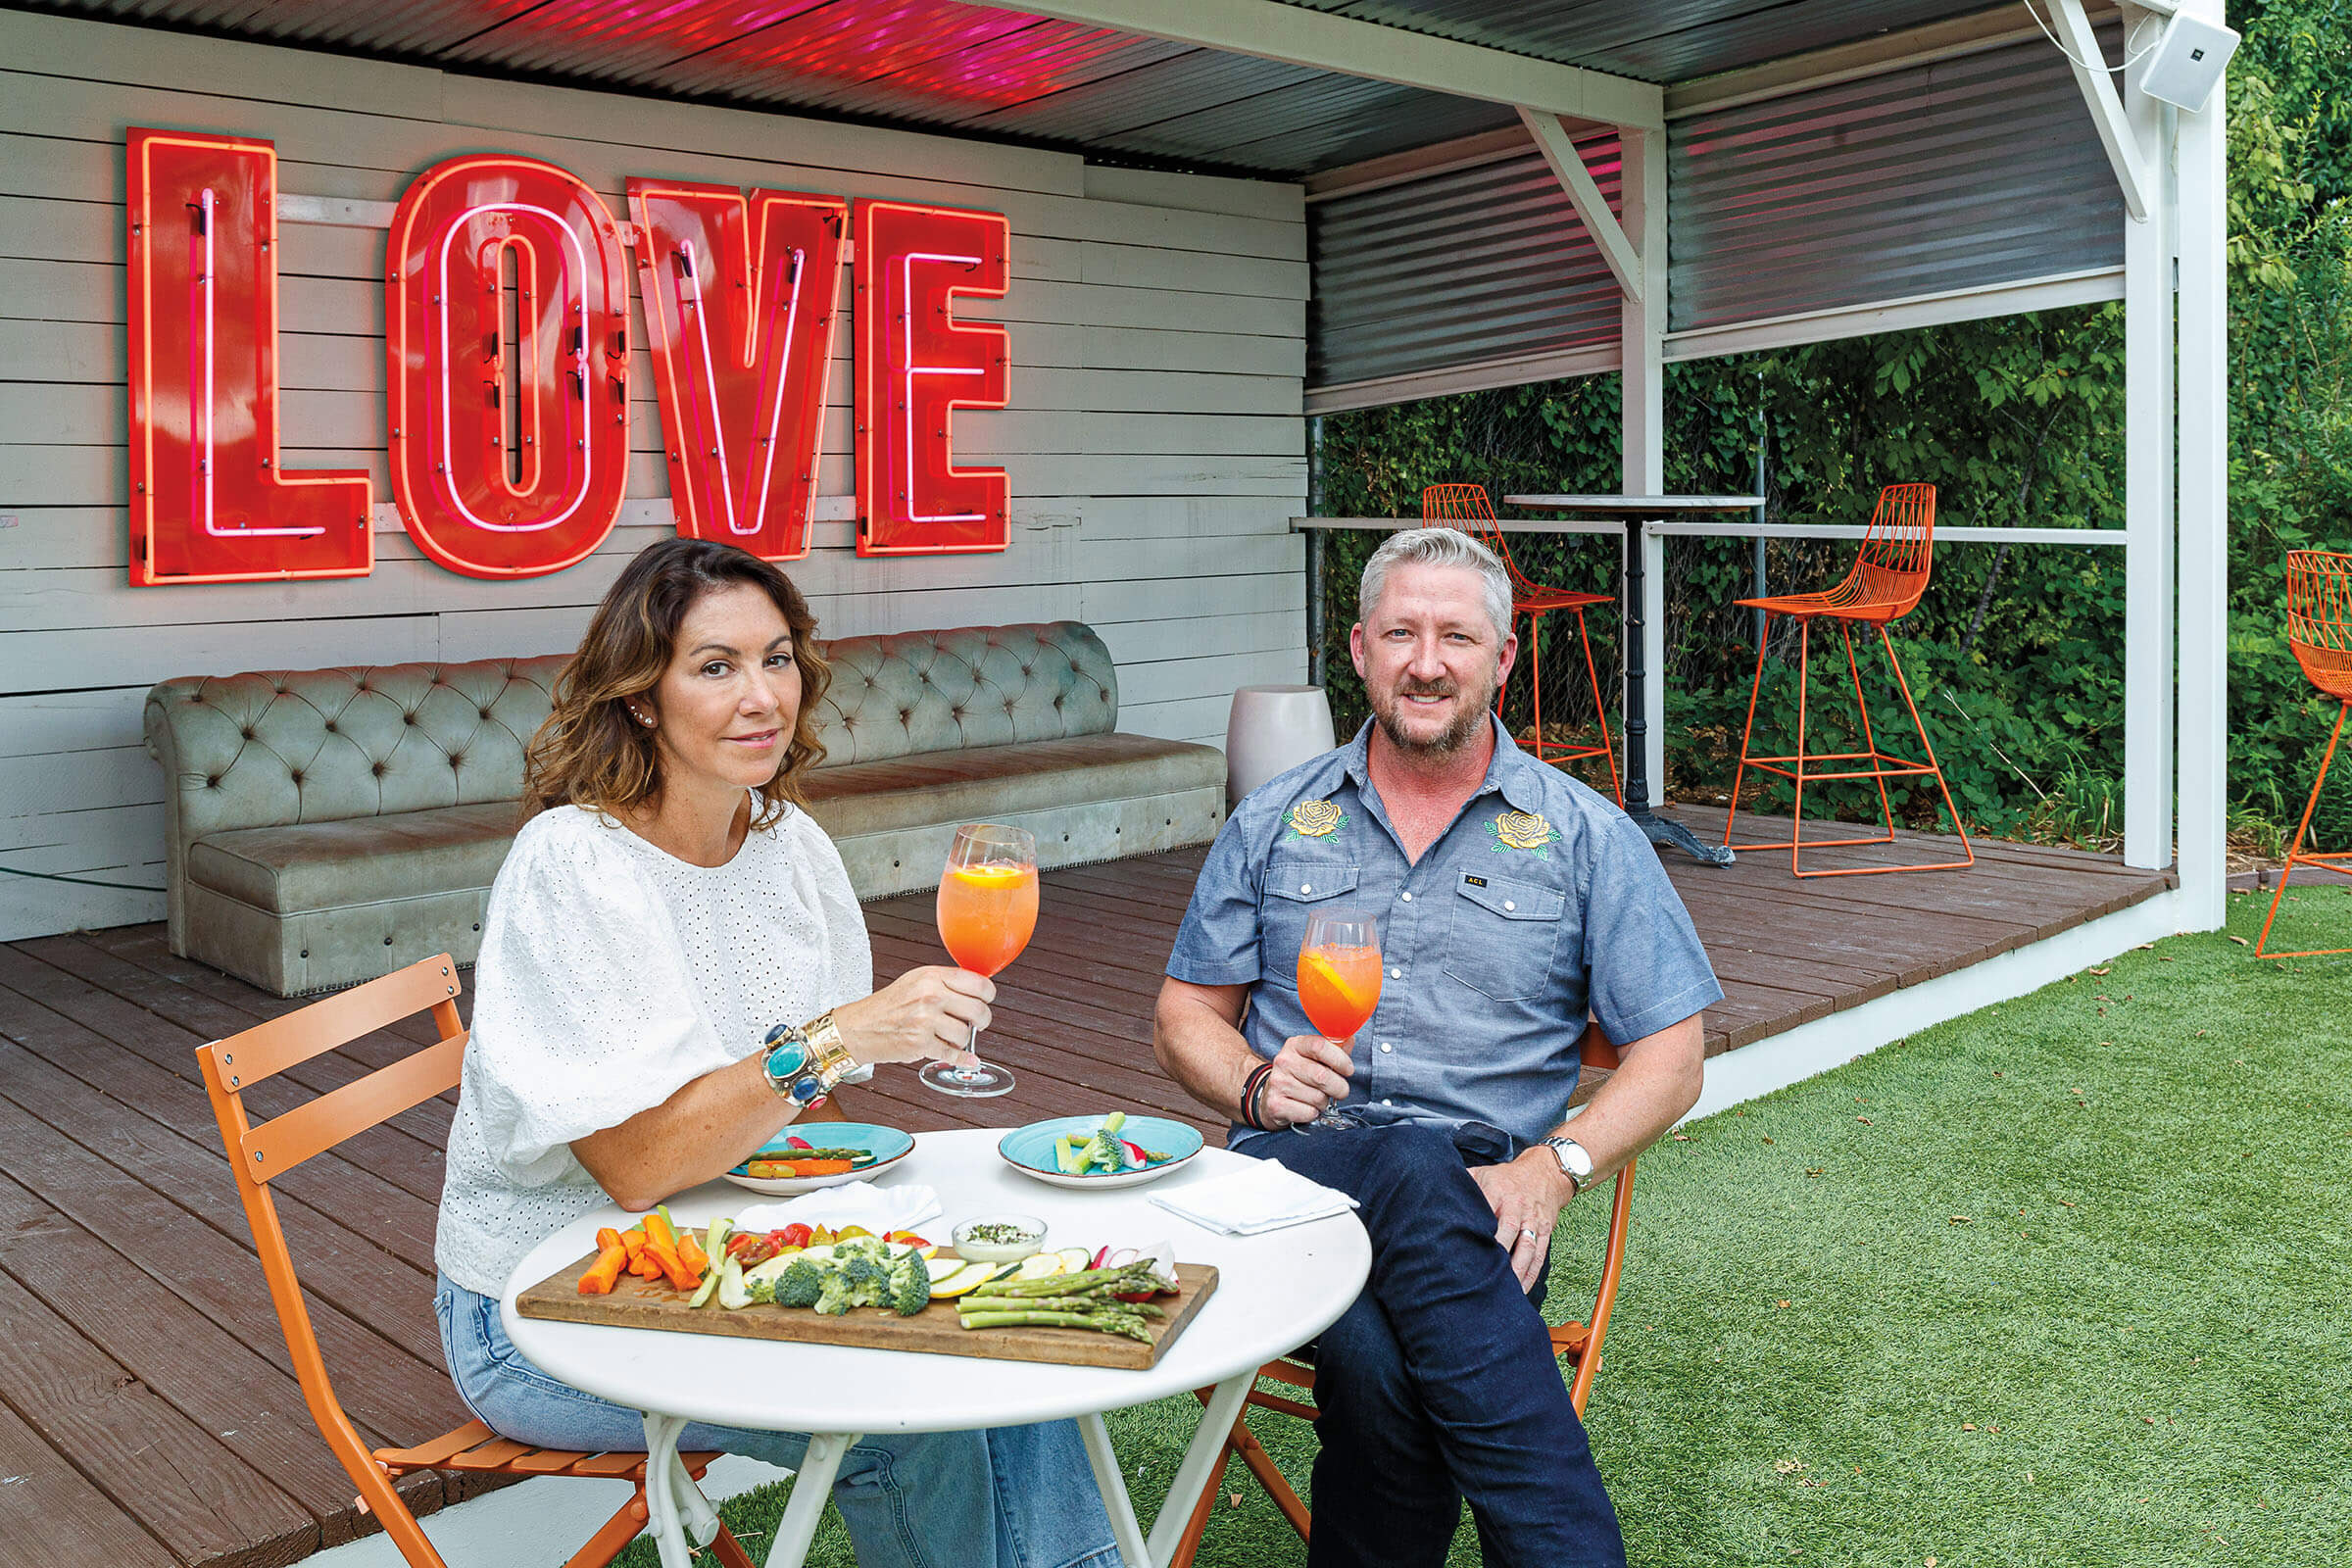 A couple sits at a folding table outside of a building with a large neon sign reading "LOVE"